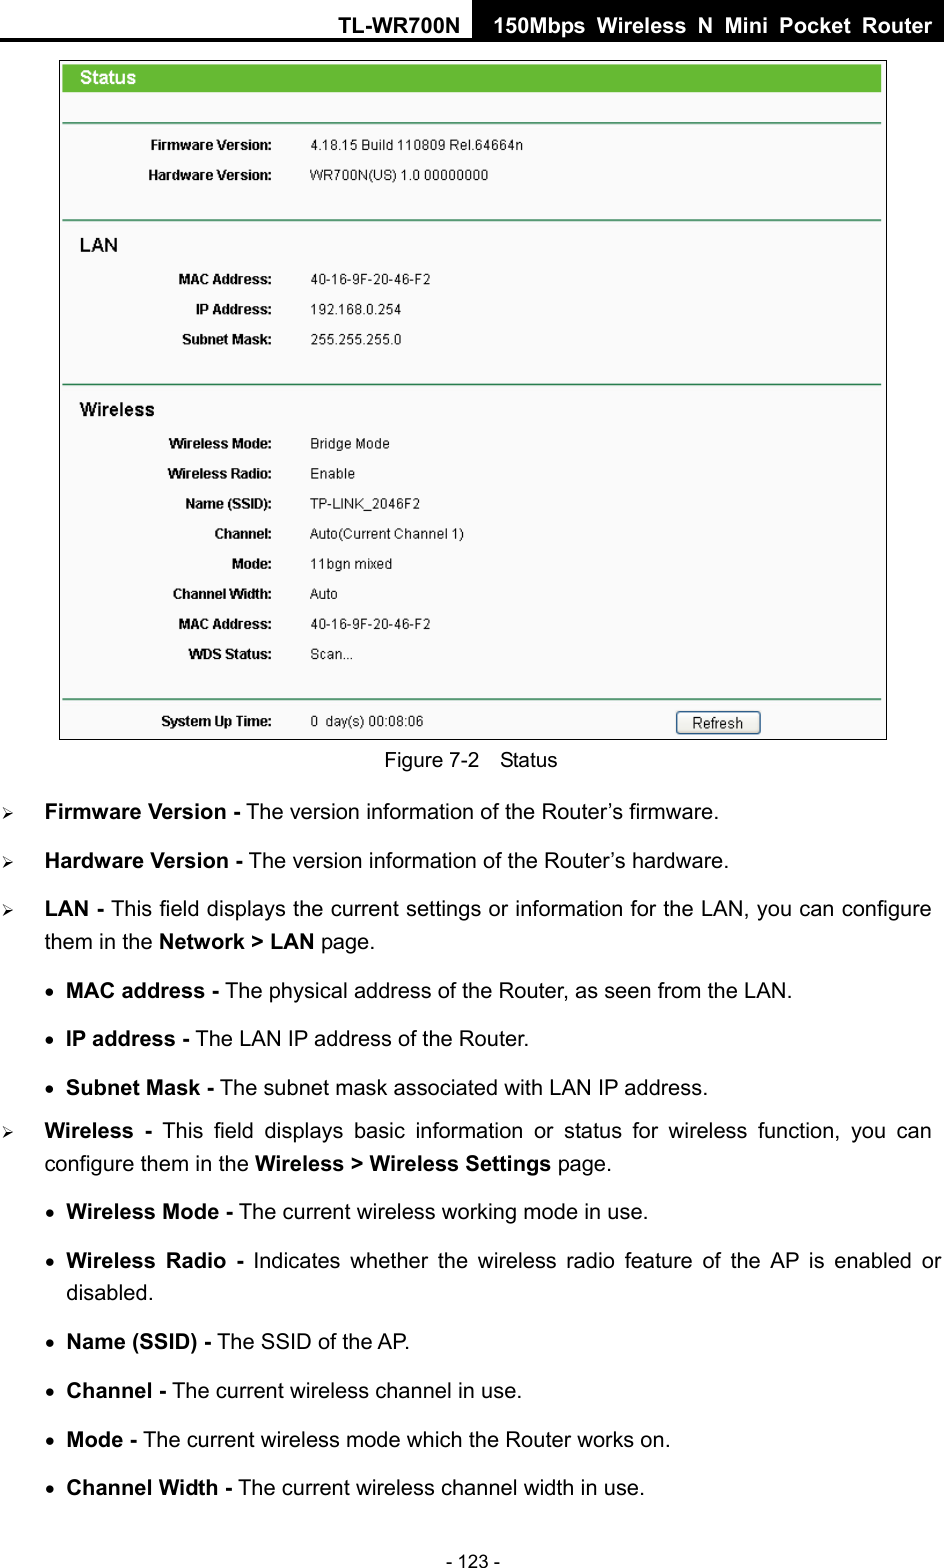 TL-WR700N 150Mbps Wireless N Mini Pocket Router - 123 -  Figure 7-2    Status ¾ Firmware Version - The version information of the Router’s firmware. ¾ Hardware Version - The version information of the Router’s hardware. ¾ LAN - This field displays the current settings or information for the LAN, you can configure them in the Network &gt; LAN page.   • MAC address - The physical address of the Router, as seen from the LAN. • IP address - The LAN IP address of the Router. • Subnet Mask - The subnet mask associated with LAN IP address. ¾ Wireless -  This field displays basic information or status for wireless function, you can configure them in the Wireless &gt; Wireless Settings page.   • Wireless Mode - The current wireless working mode in use. • Wireless Radio - Indicates whether the wireless radio feature of the AP is enabled or disabled. • Name (SSID) - The SSID of the AP. • Channel - The current wireless channel in use. • Mode - The current wireless mode which the Router works on. • Channel Width - The current wireless channel width in use. 